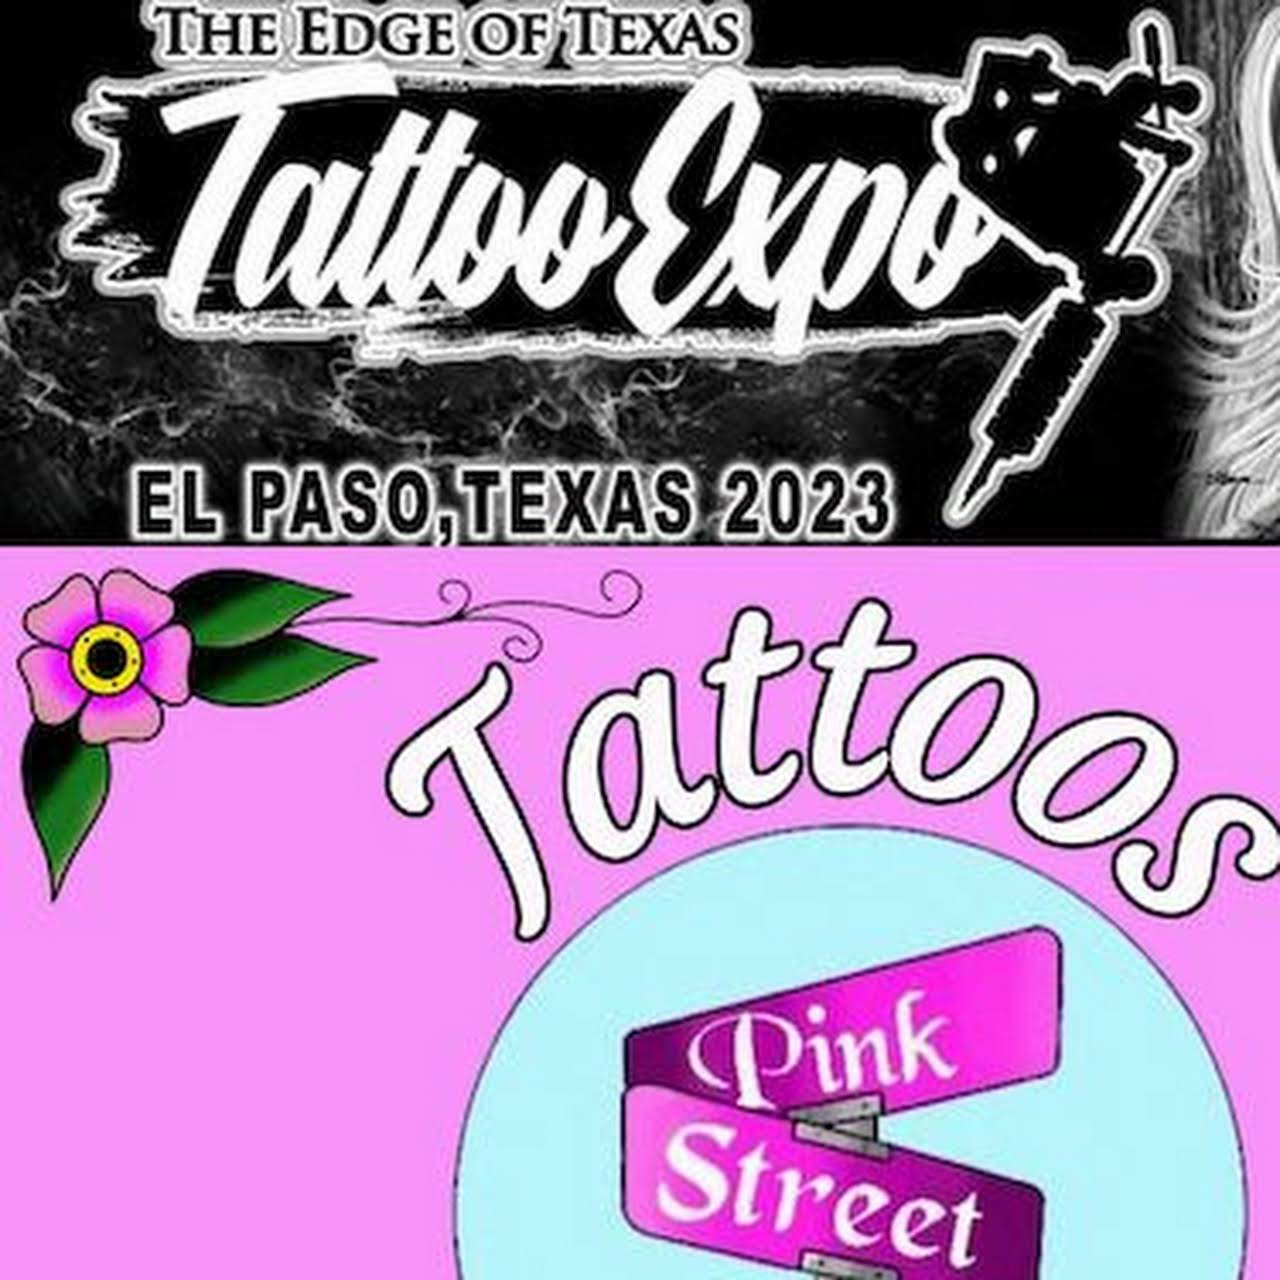 debbie stallings recommends tattoo shops in el paso pic